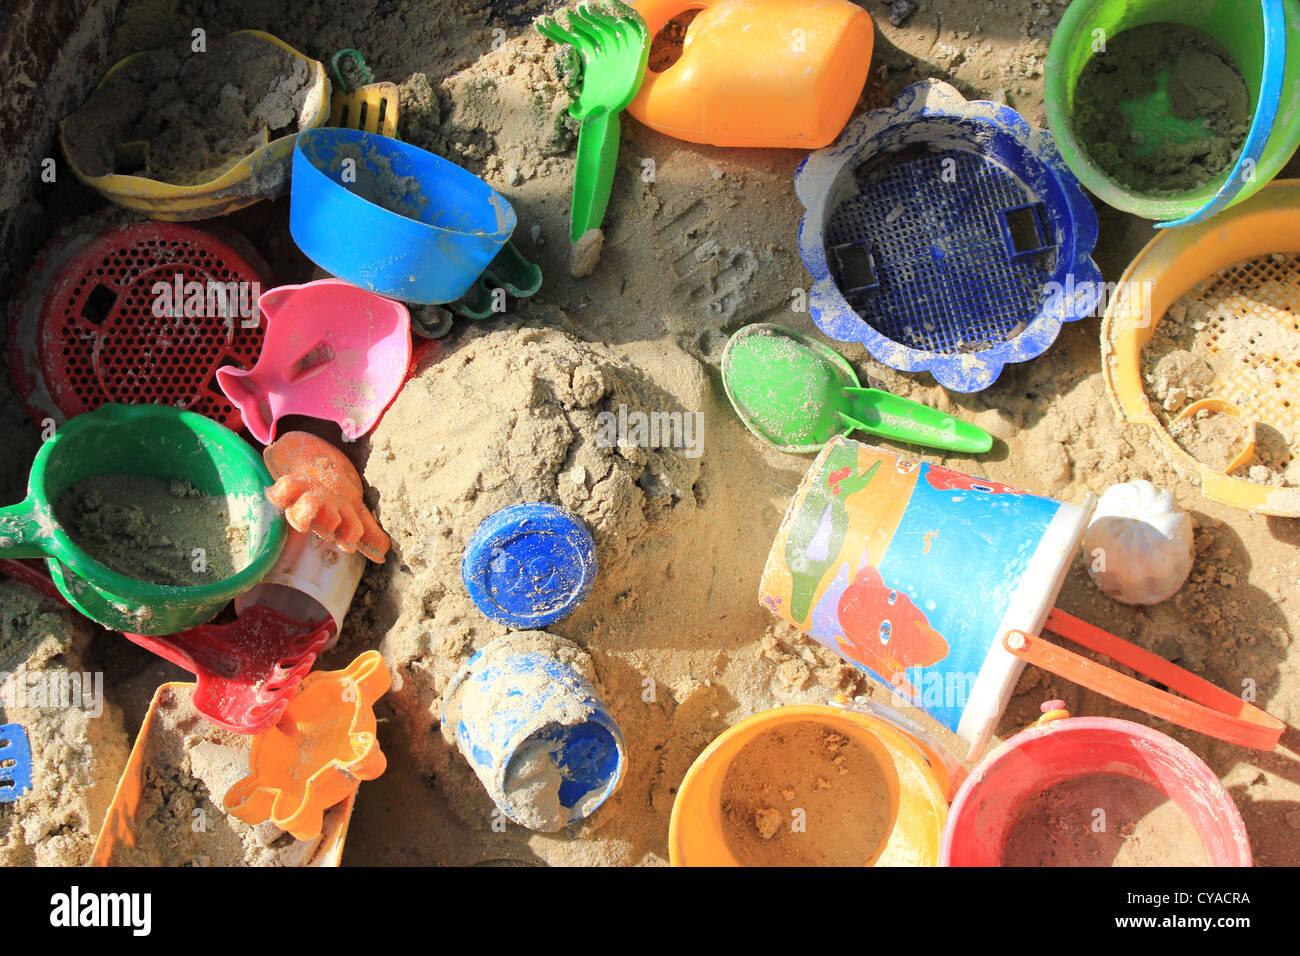 Sandpit full of plastic toys in bright colours Stock Photo